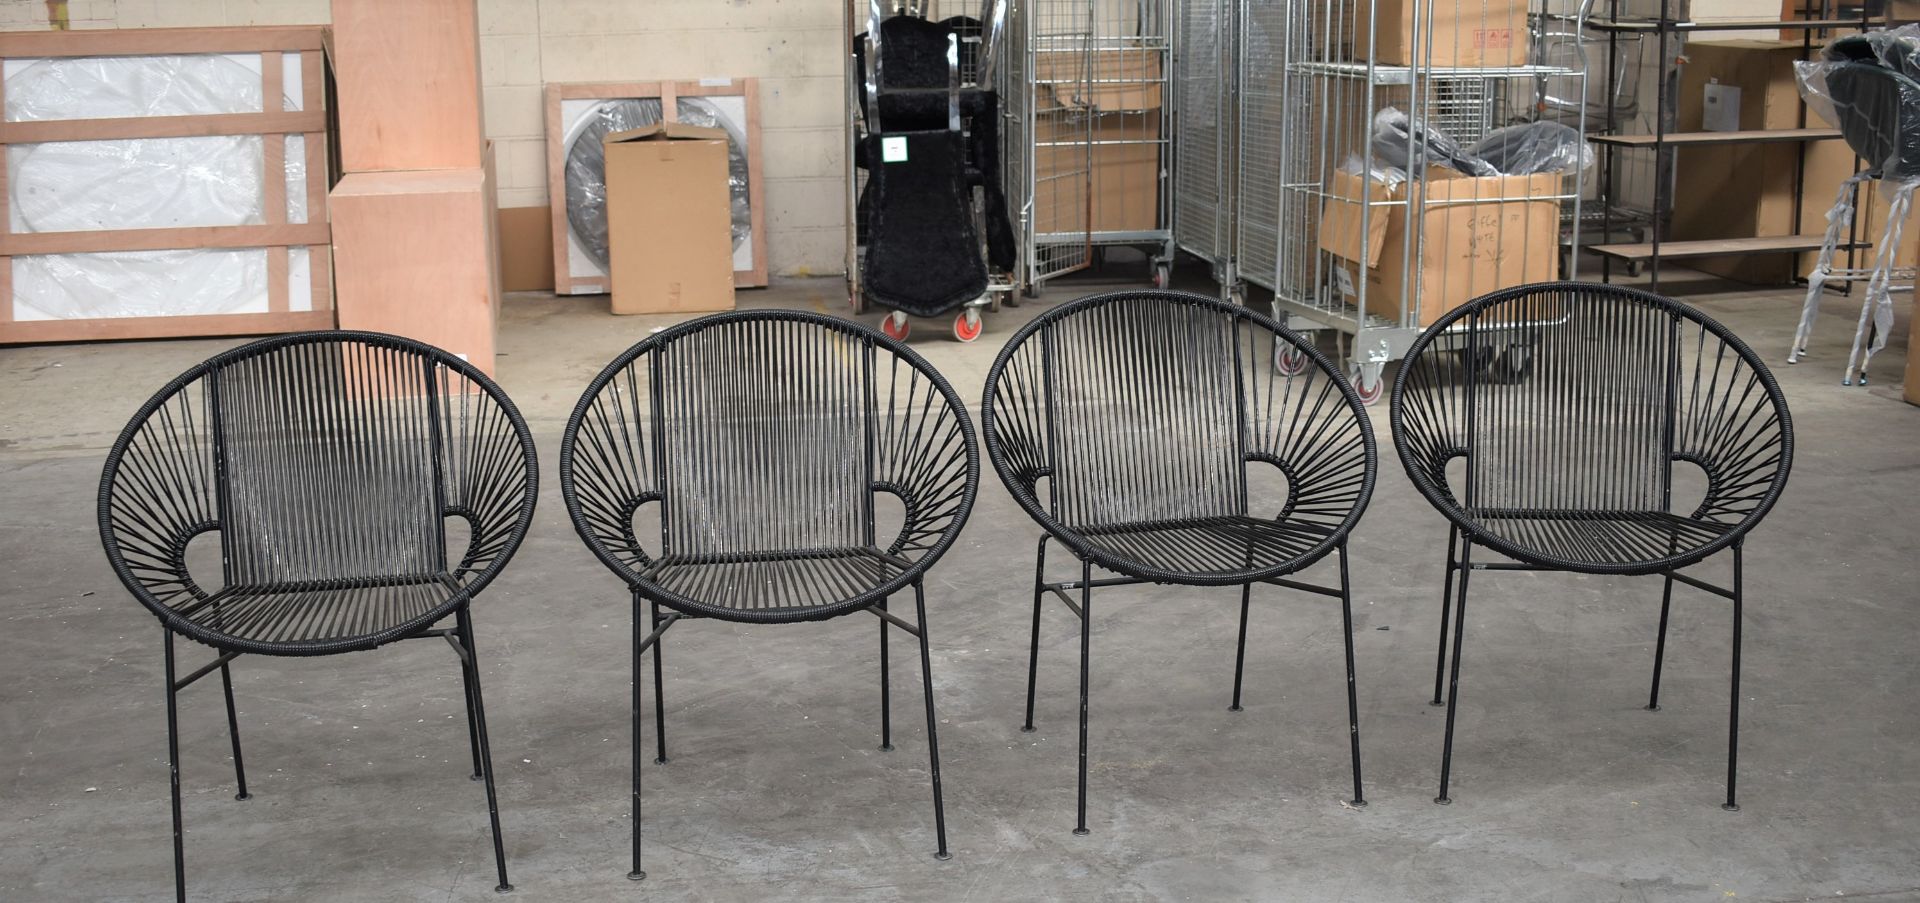 4 x Innit Designer Chairs - Acapulco Style Chairs in Black Suitable For Indoor or Outdoor Use - - Image 5 of 10